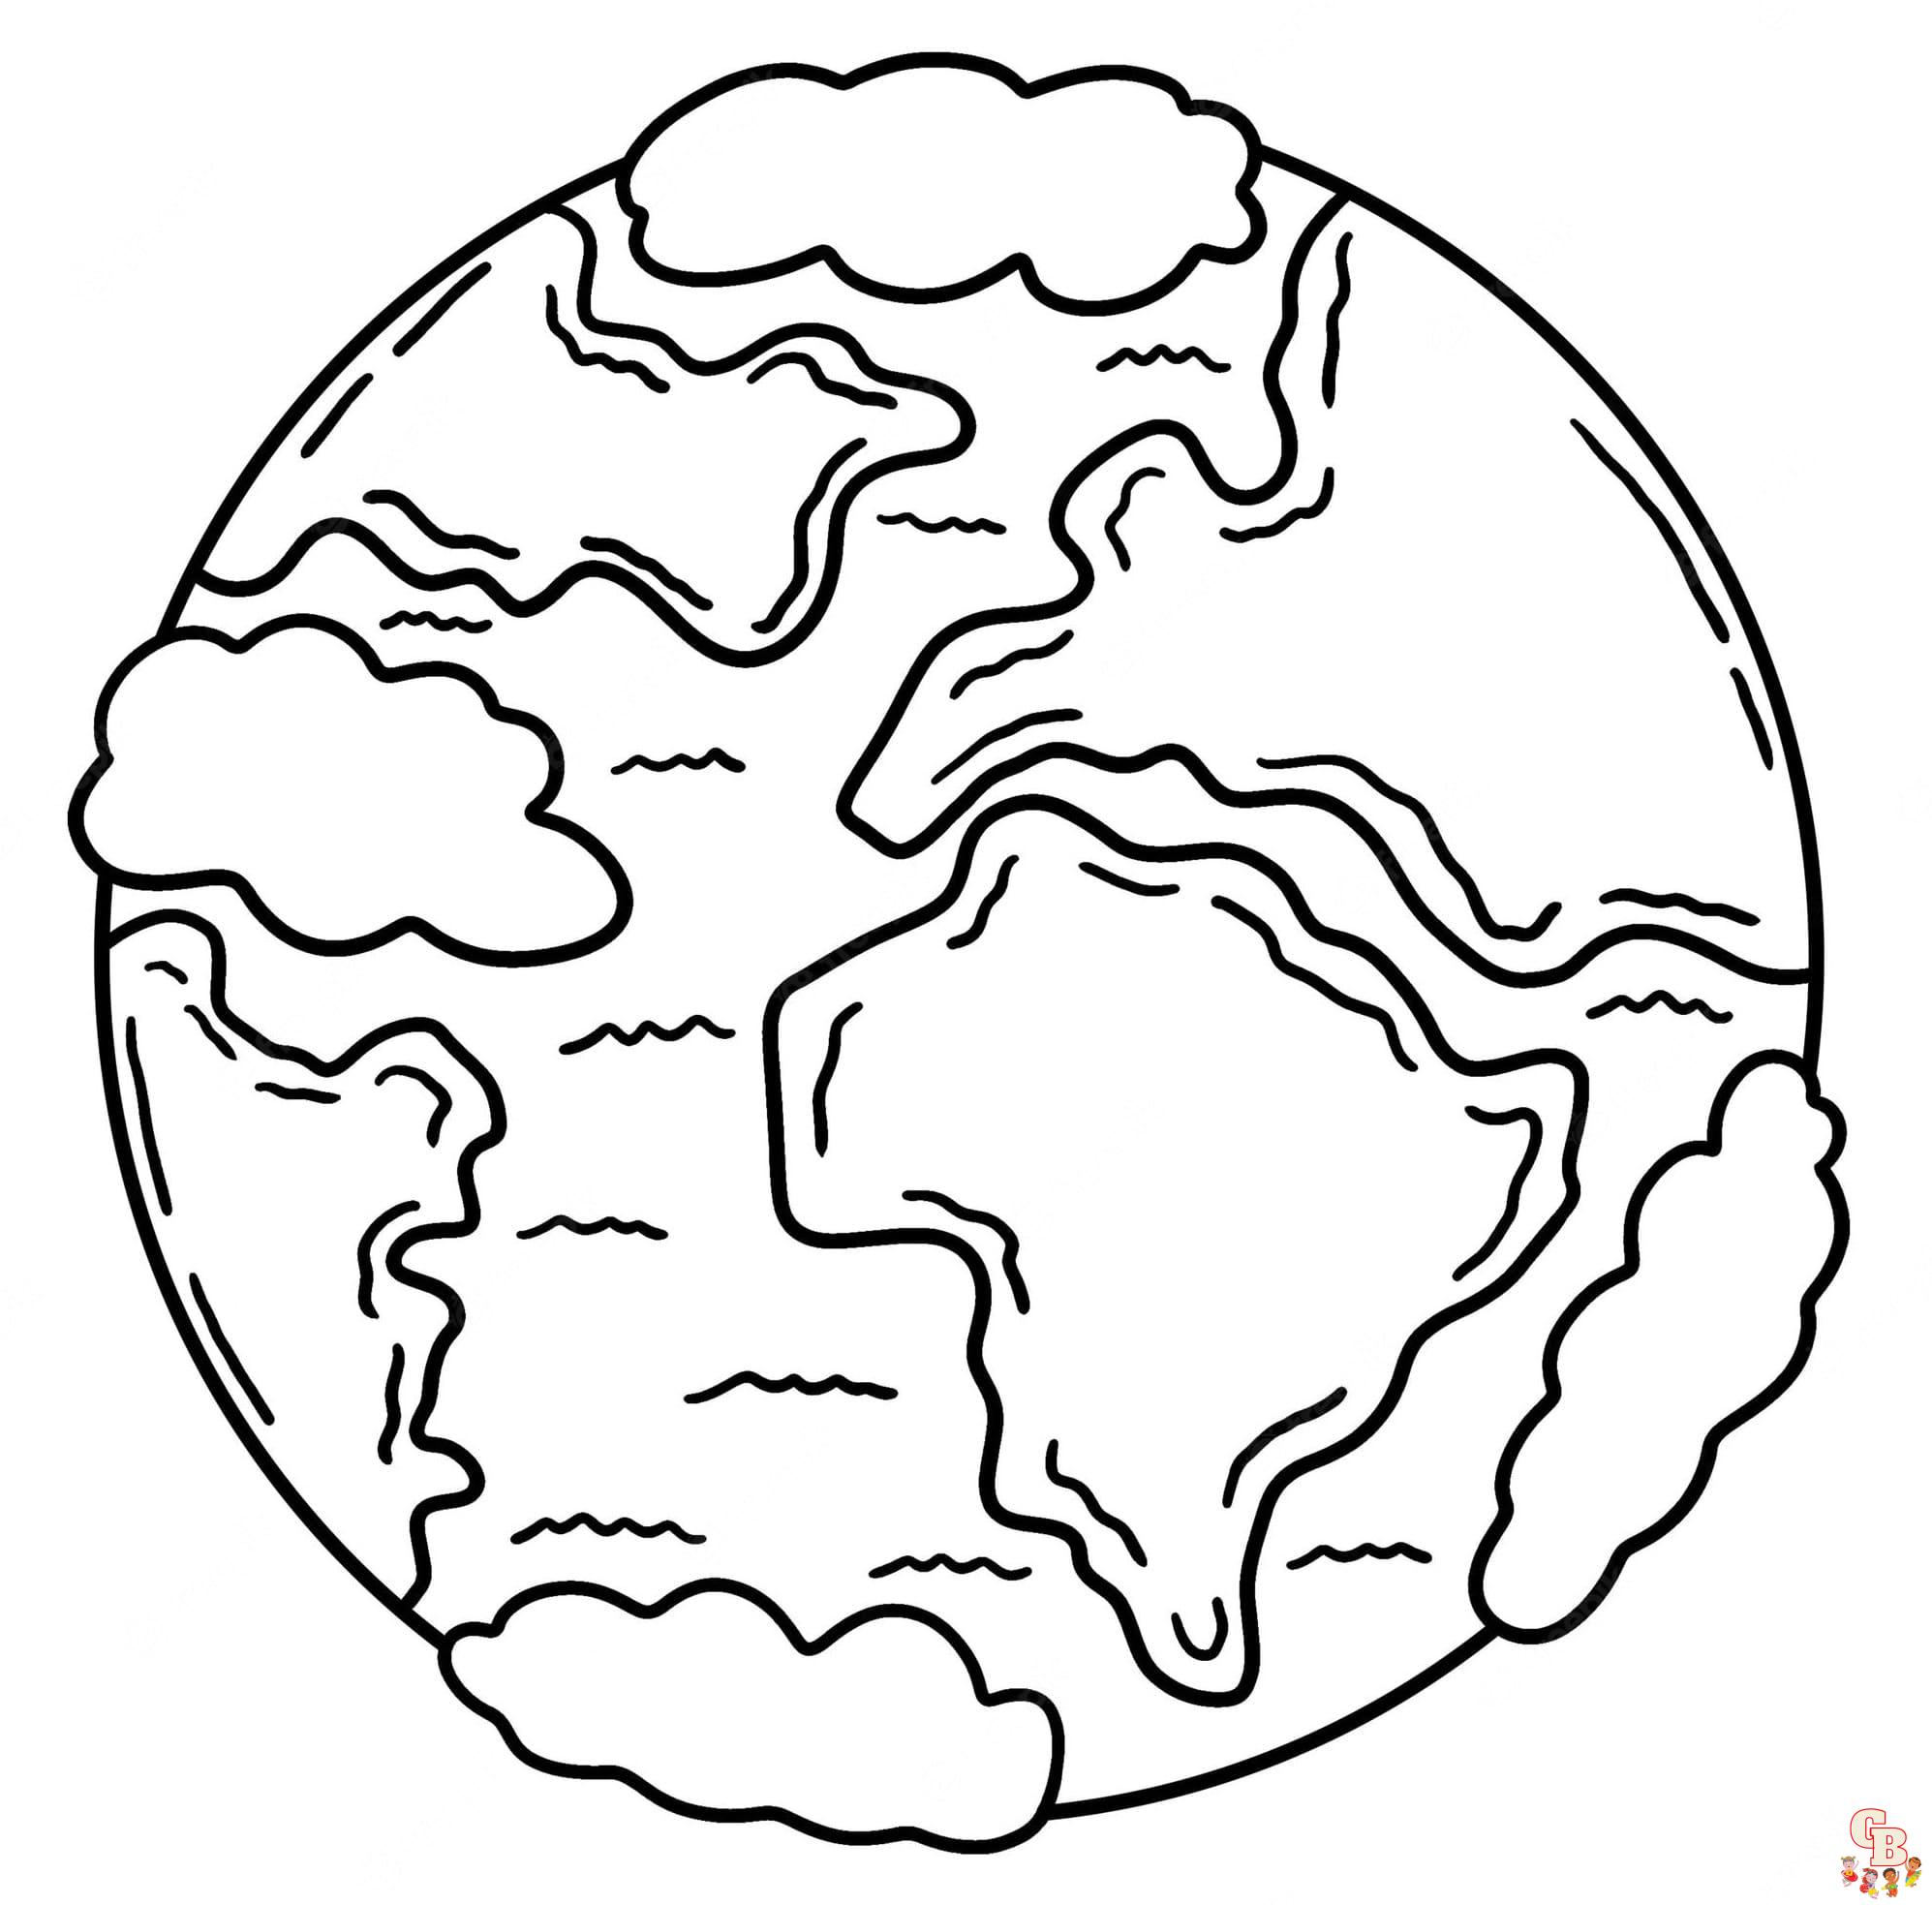 Earth coloring pages to print